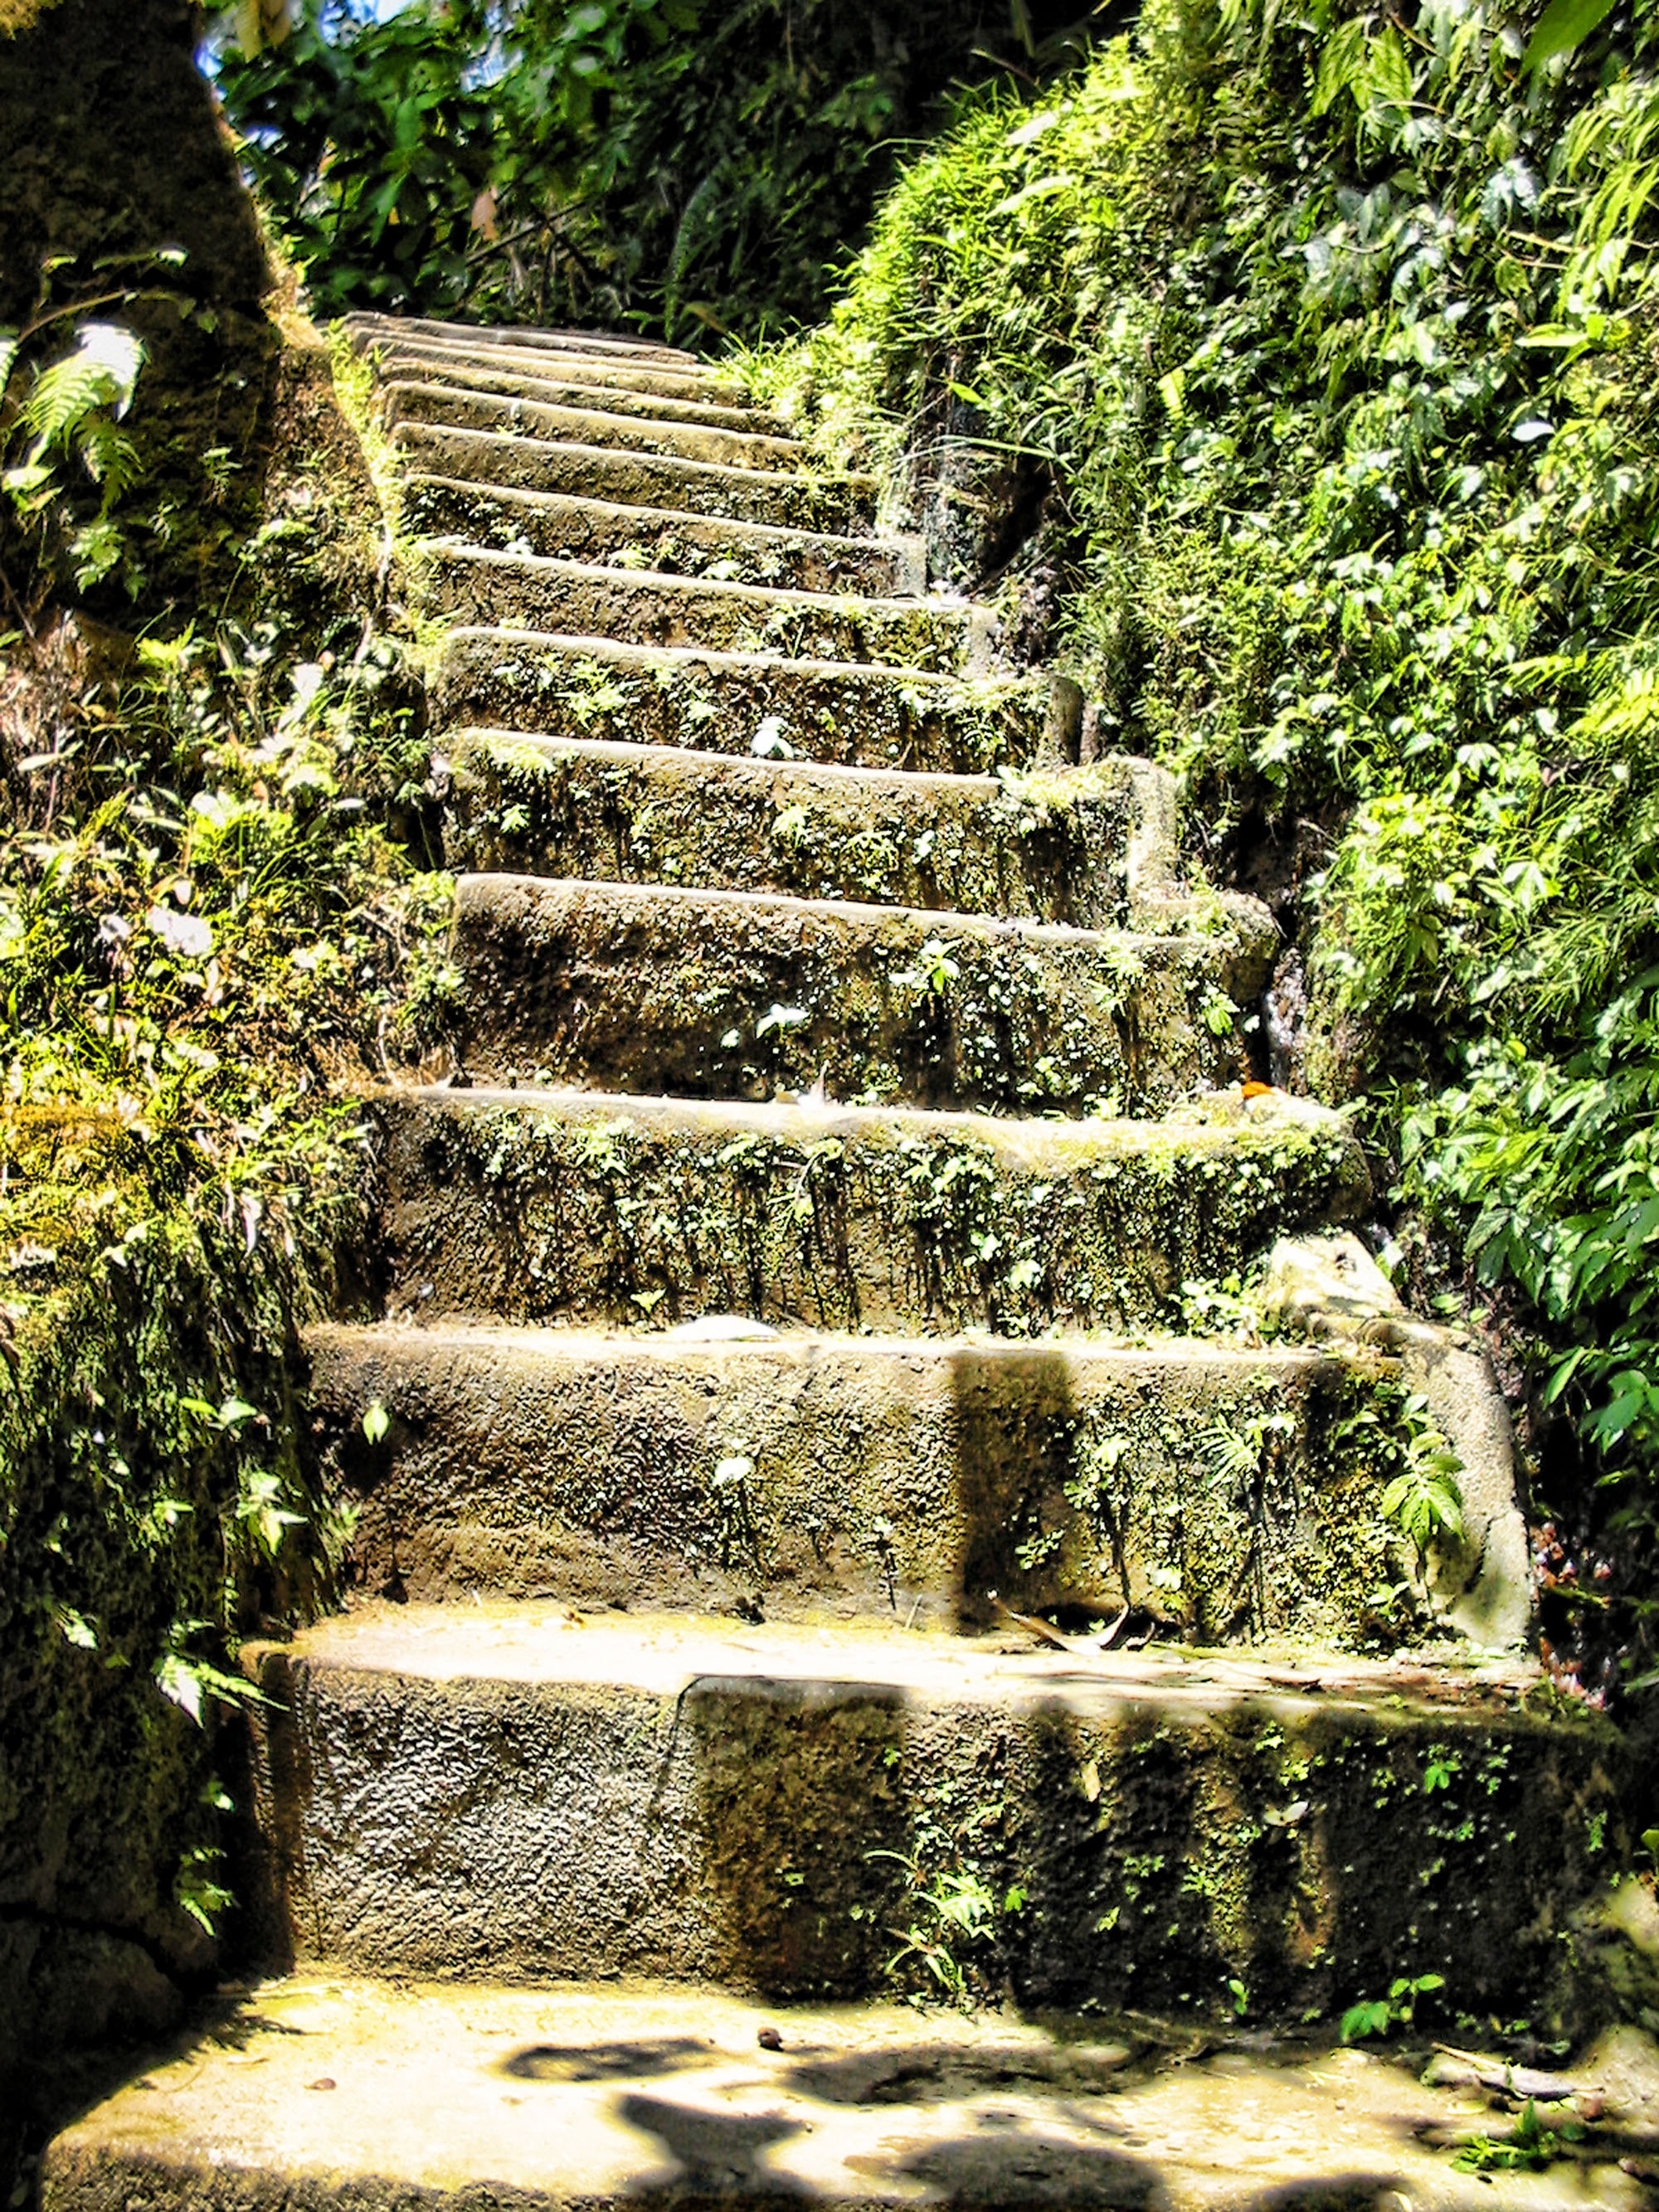 Rise, Leaves, Stairs, Bush, Overgrown, steps, steps and staircases